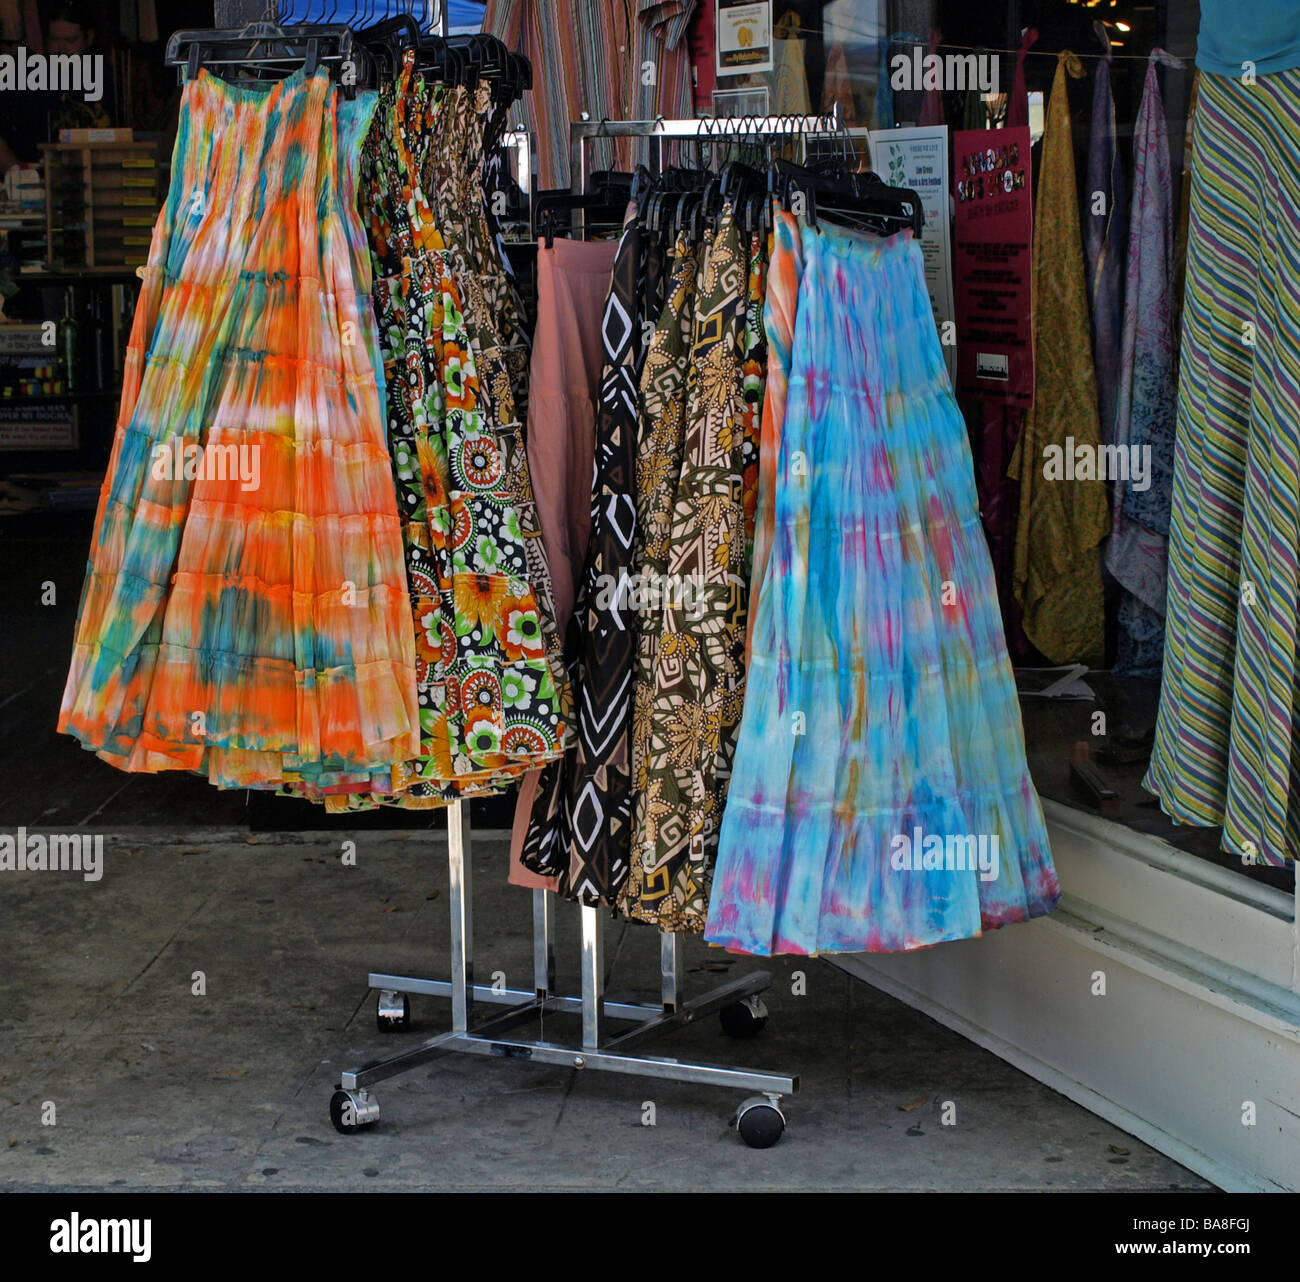 multi-colored dresses on a display rack outside of a store commercial establishment, skirts skirt Stock Photo